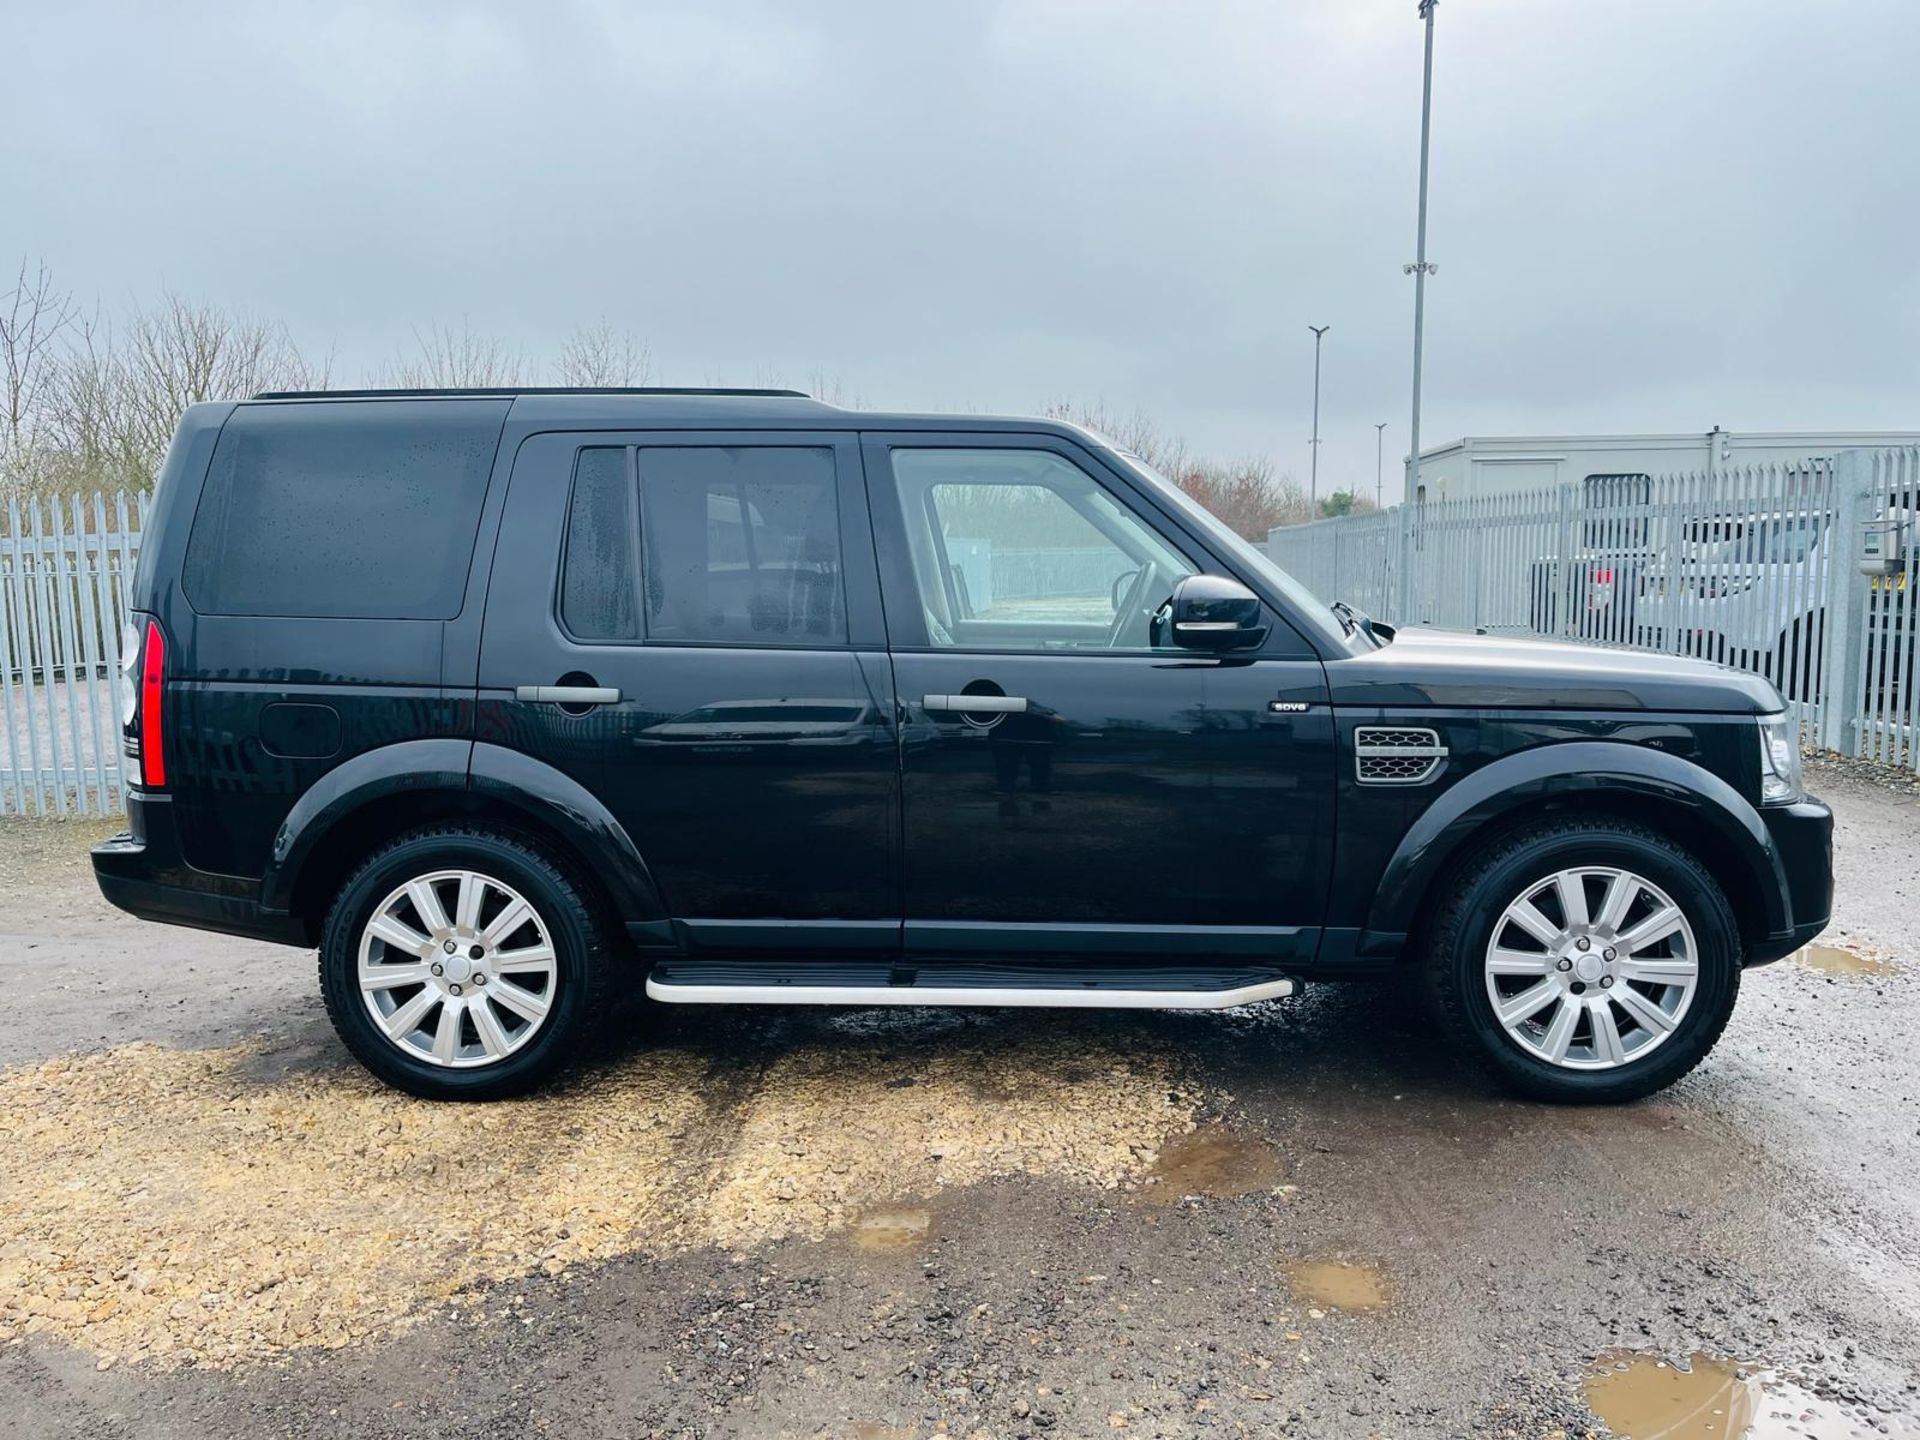 ** ON SALE ** Land Rover Discovery 4 Commercial SE SDV6 255 3.0 Automatic 2916 '16 Reg' - Image 10 of 34